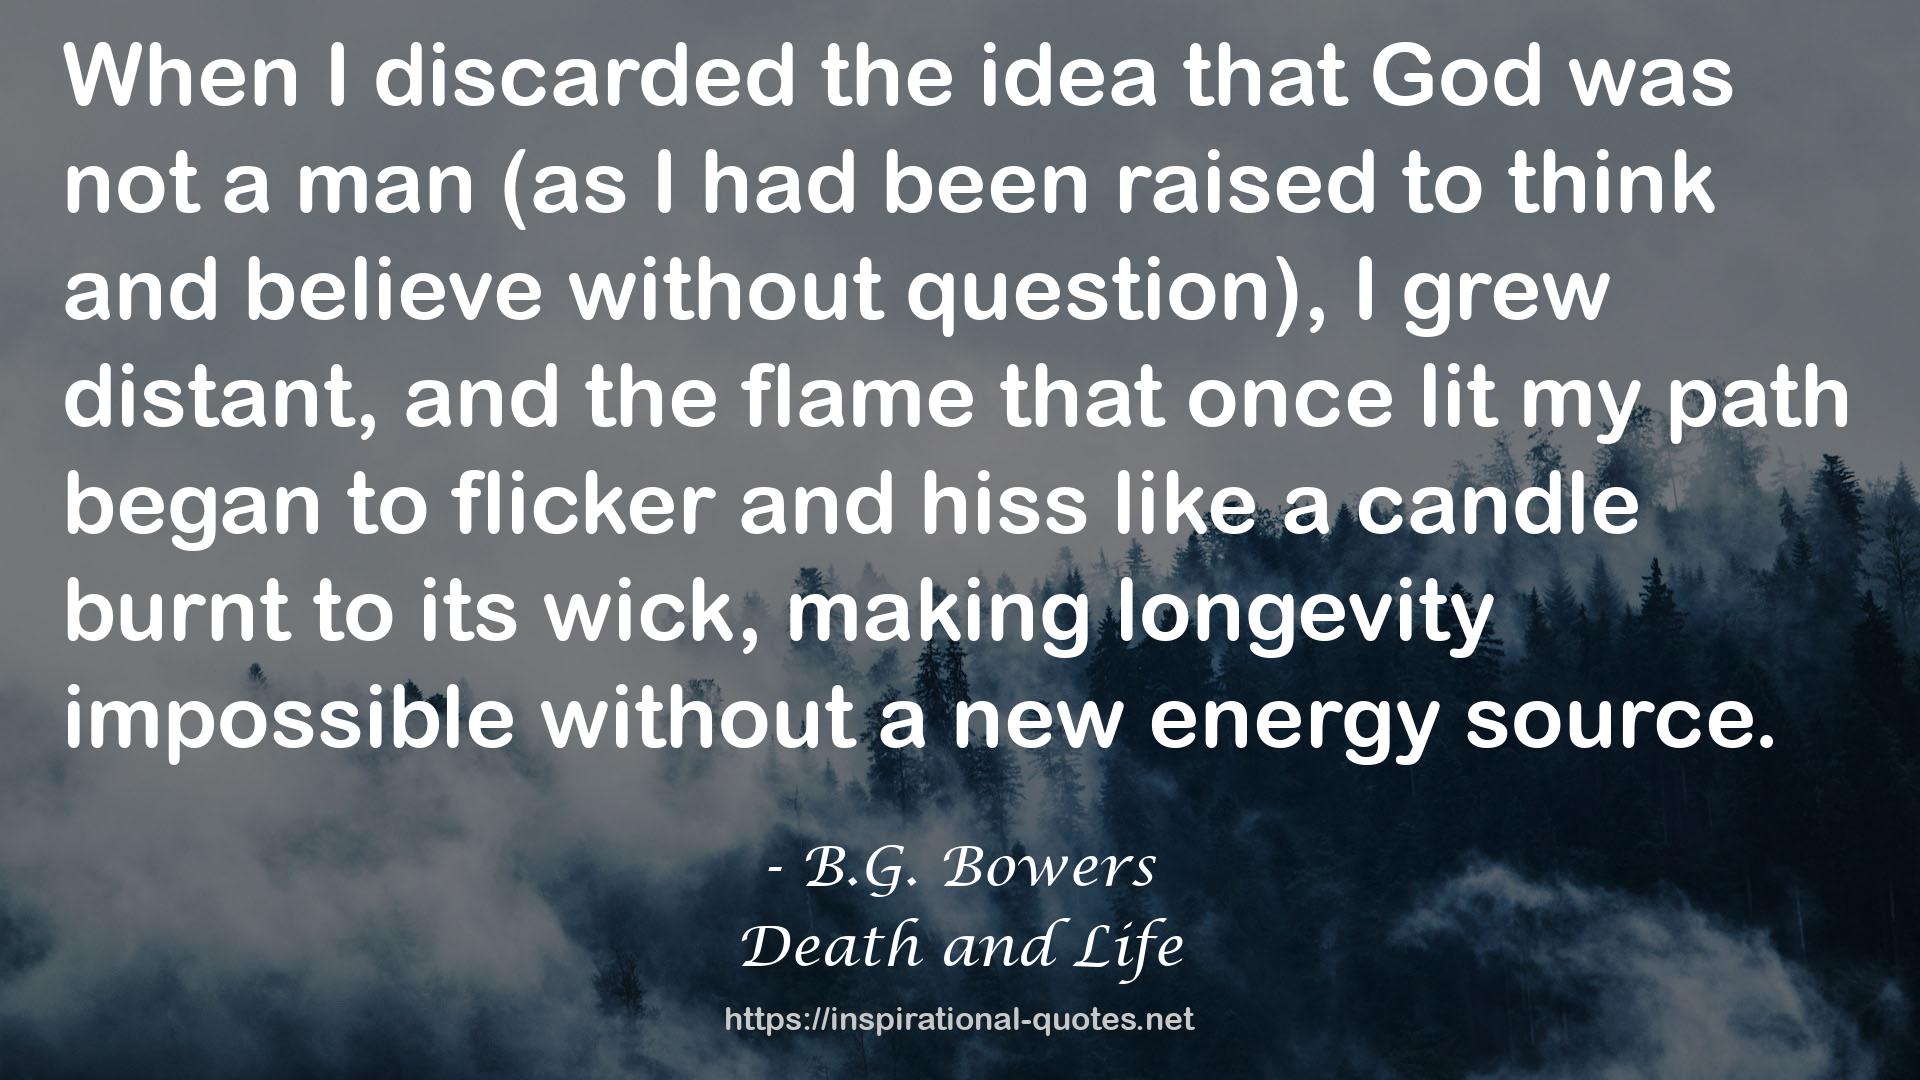 B.G. Bowers QUOTES